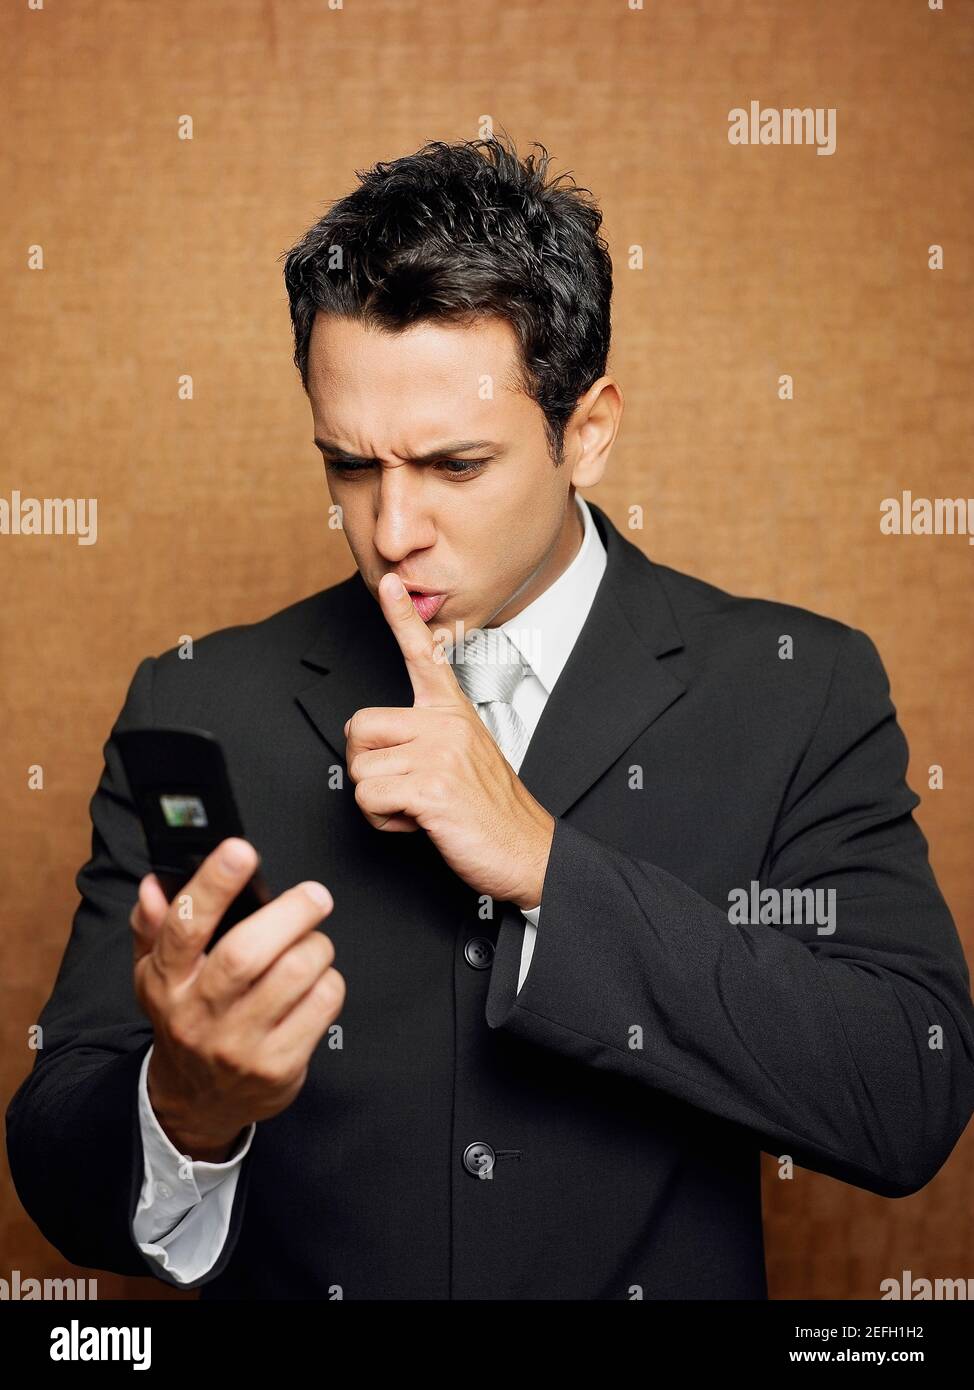 Close up of a businessman holding a mobile phone and gesturing Stock Photo